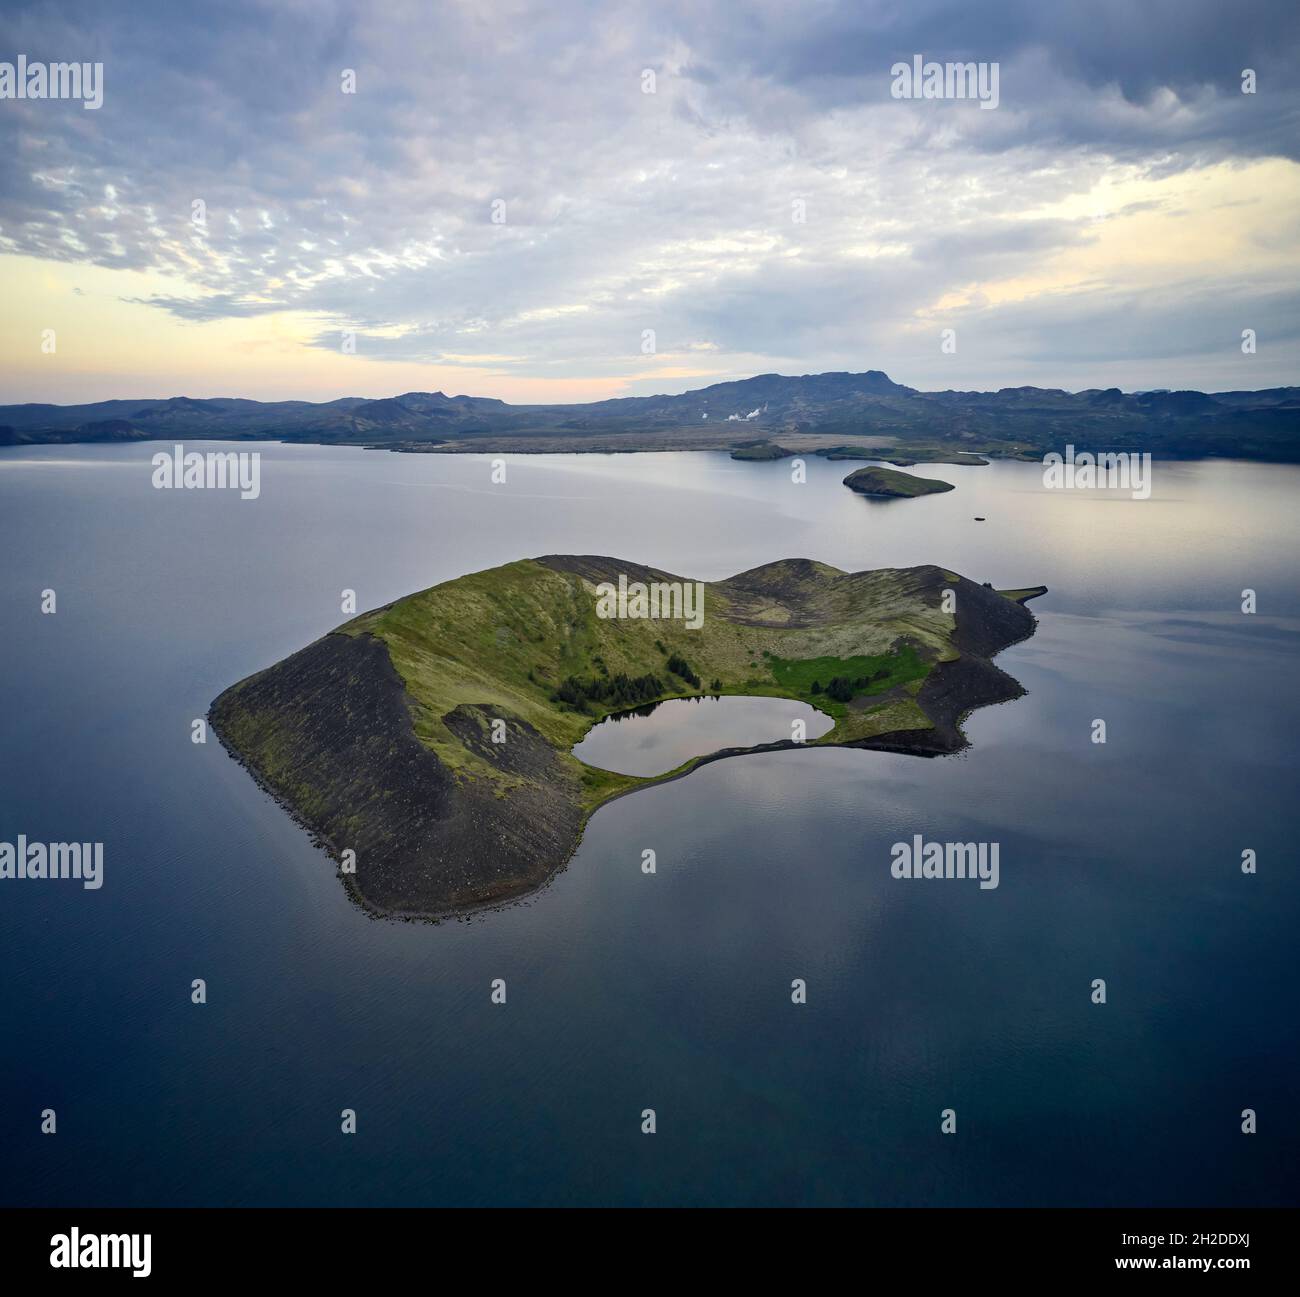 Amazing drone view of green island located in water of calm pond under sunset sky in Iceland Stock Photo